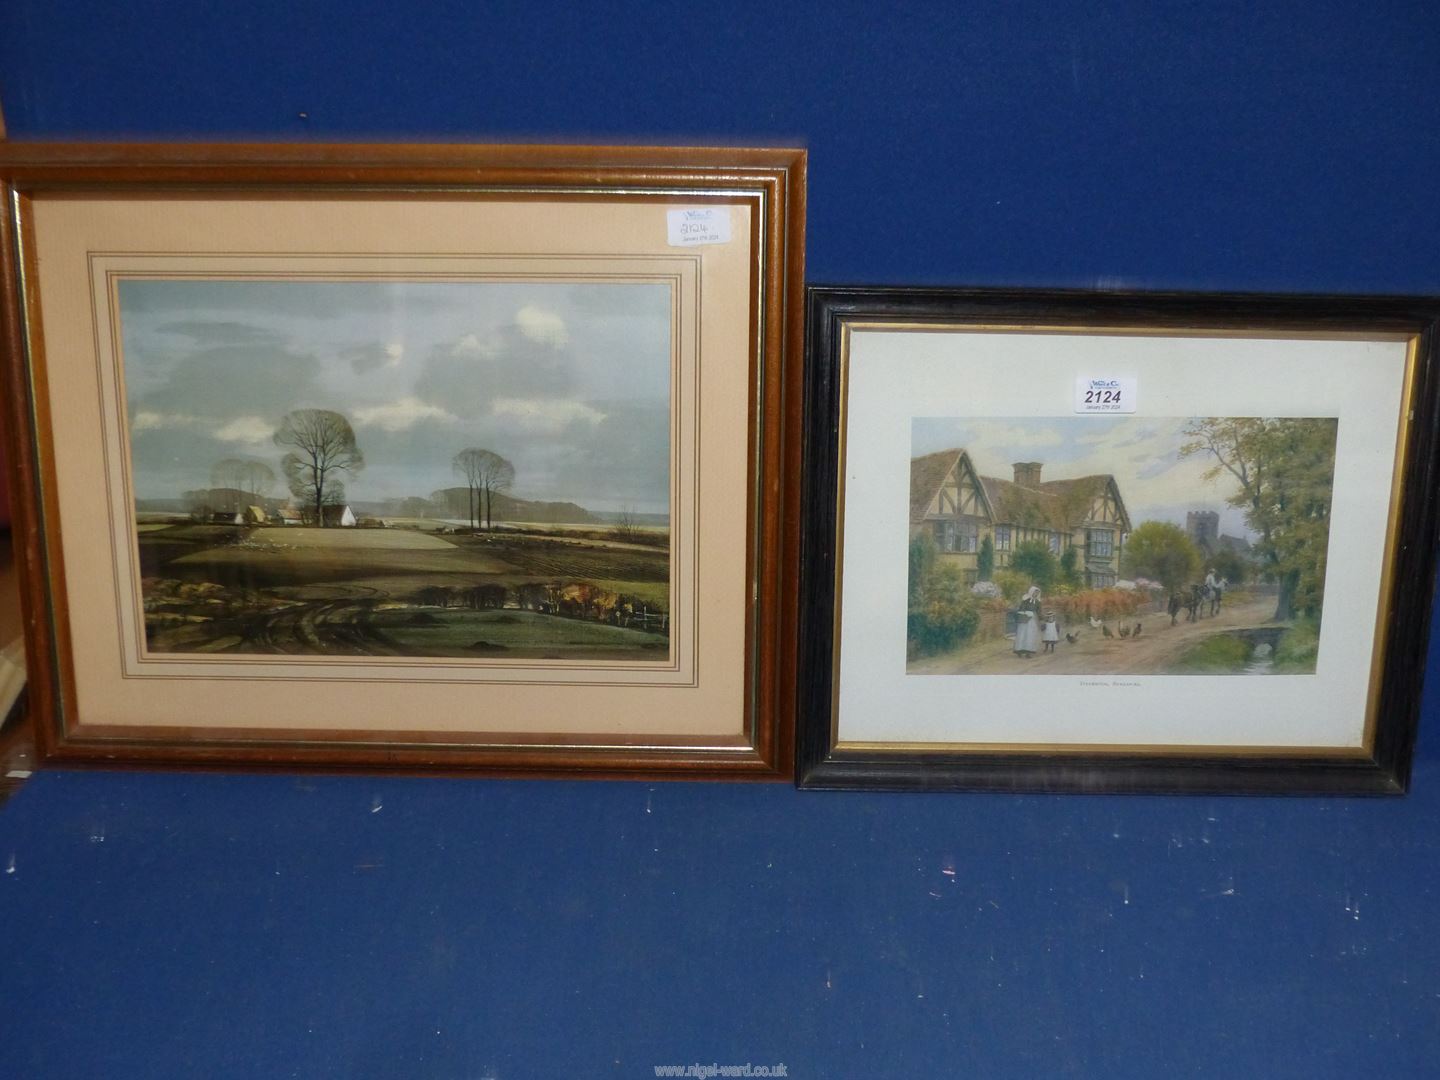 A small framed Print titled "Steventon, Berkshire" initialled lower right A.R.Q.